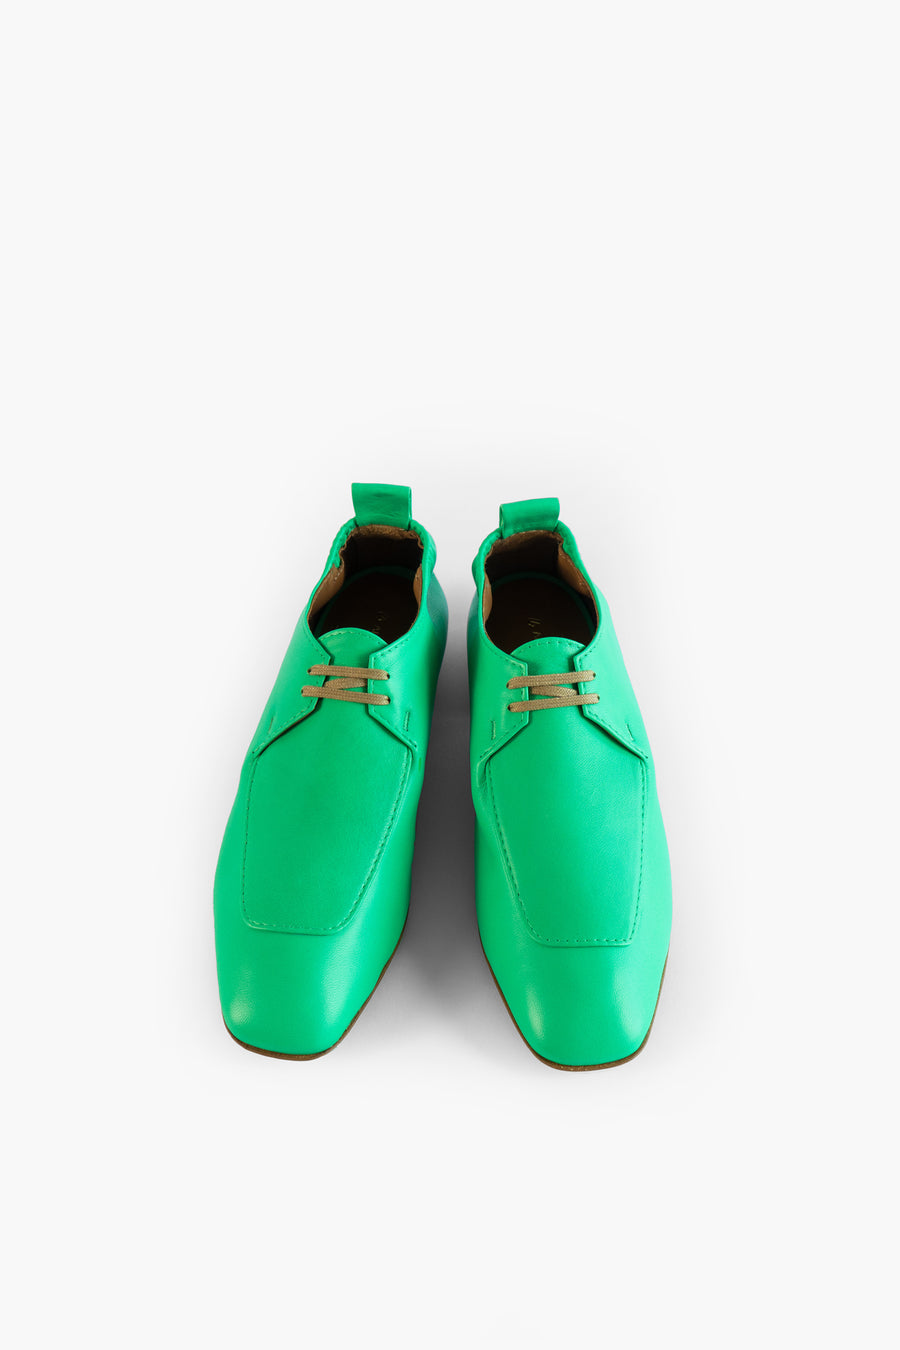 TEDA | Sustainable Shoes Made in Germany